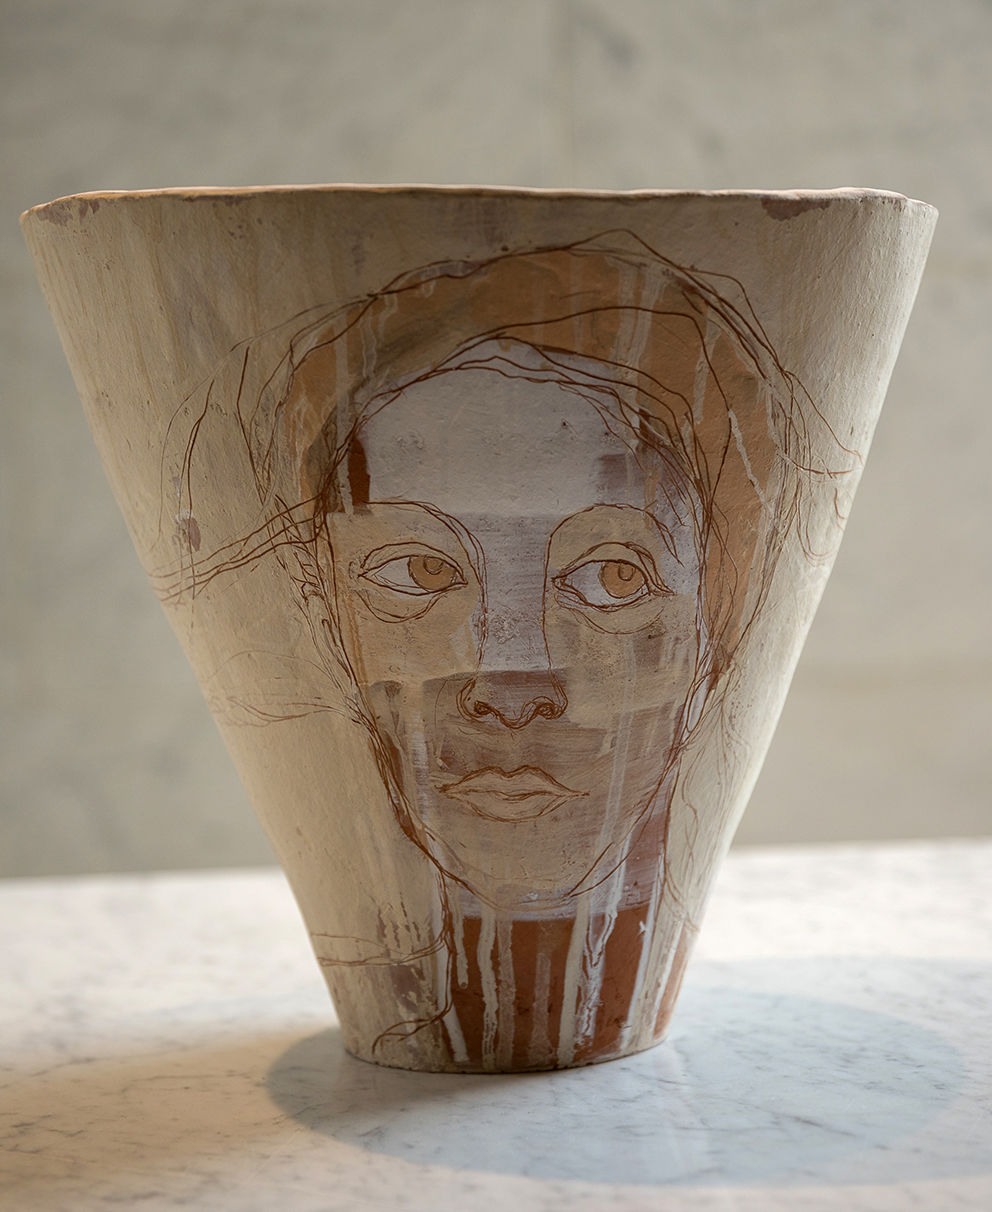 Ellen I (2019), Finnish earthenware body, painted with soil and sediments gathered from Venice, 34 x 36 cm. Photo: Kalle Kaitala